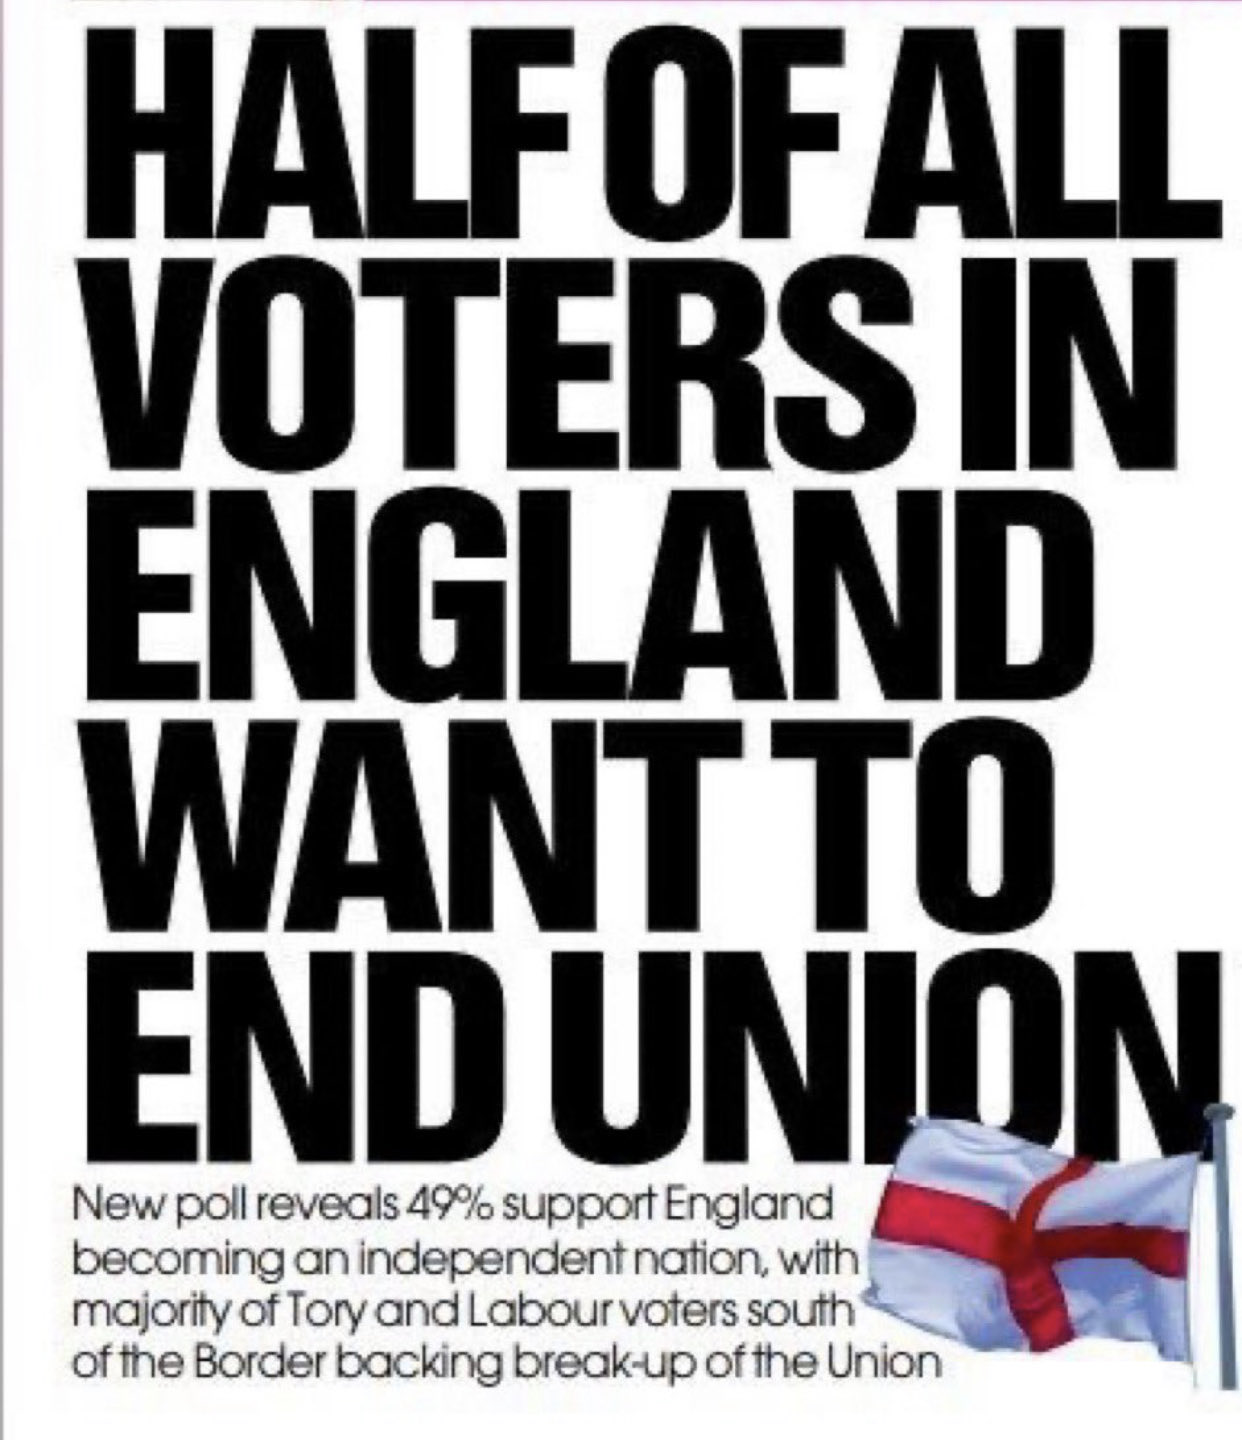 Half of voters in England want end of UK